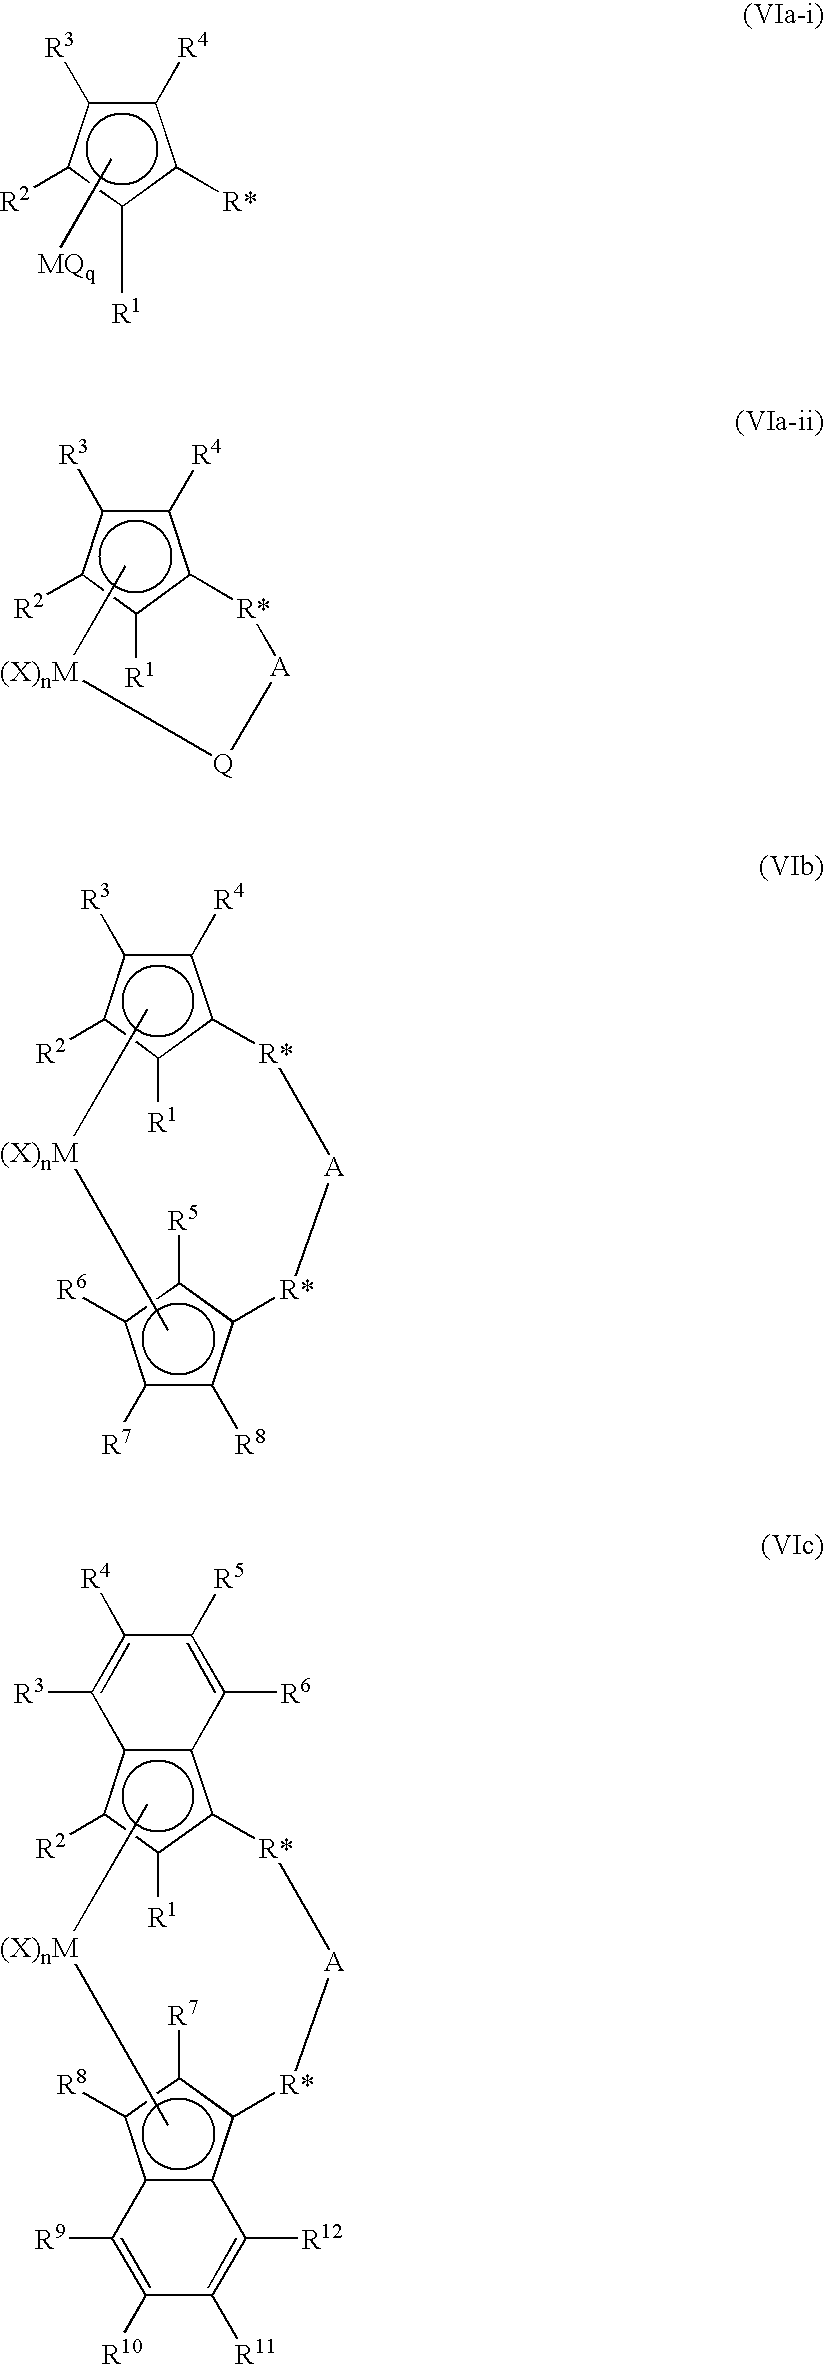 Synthesis of polymerization catalyst components